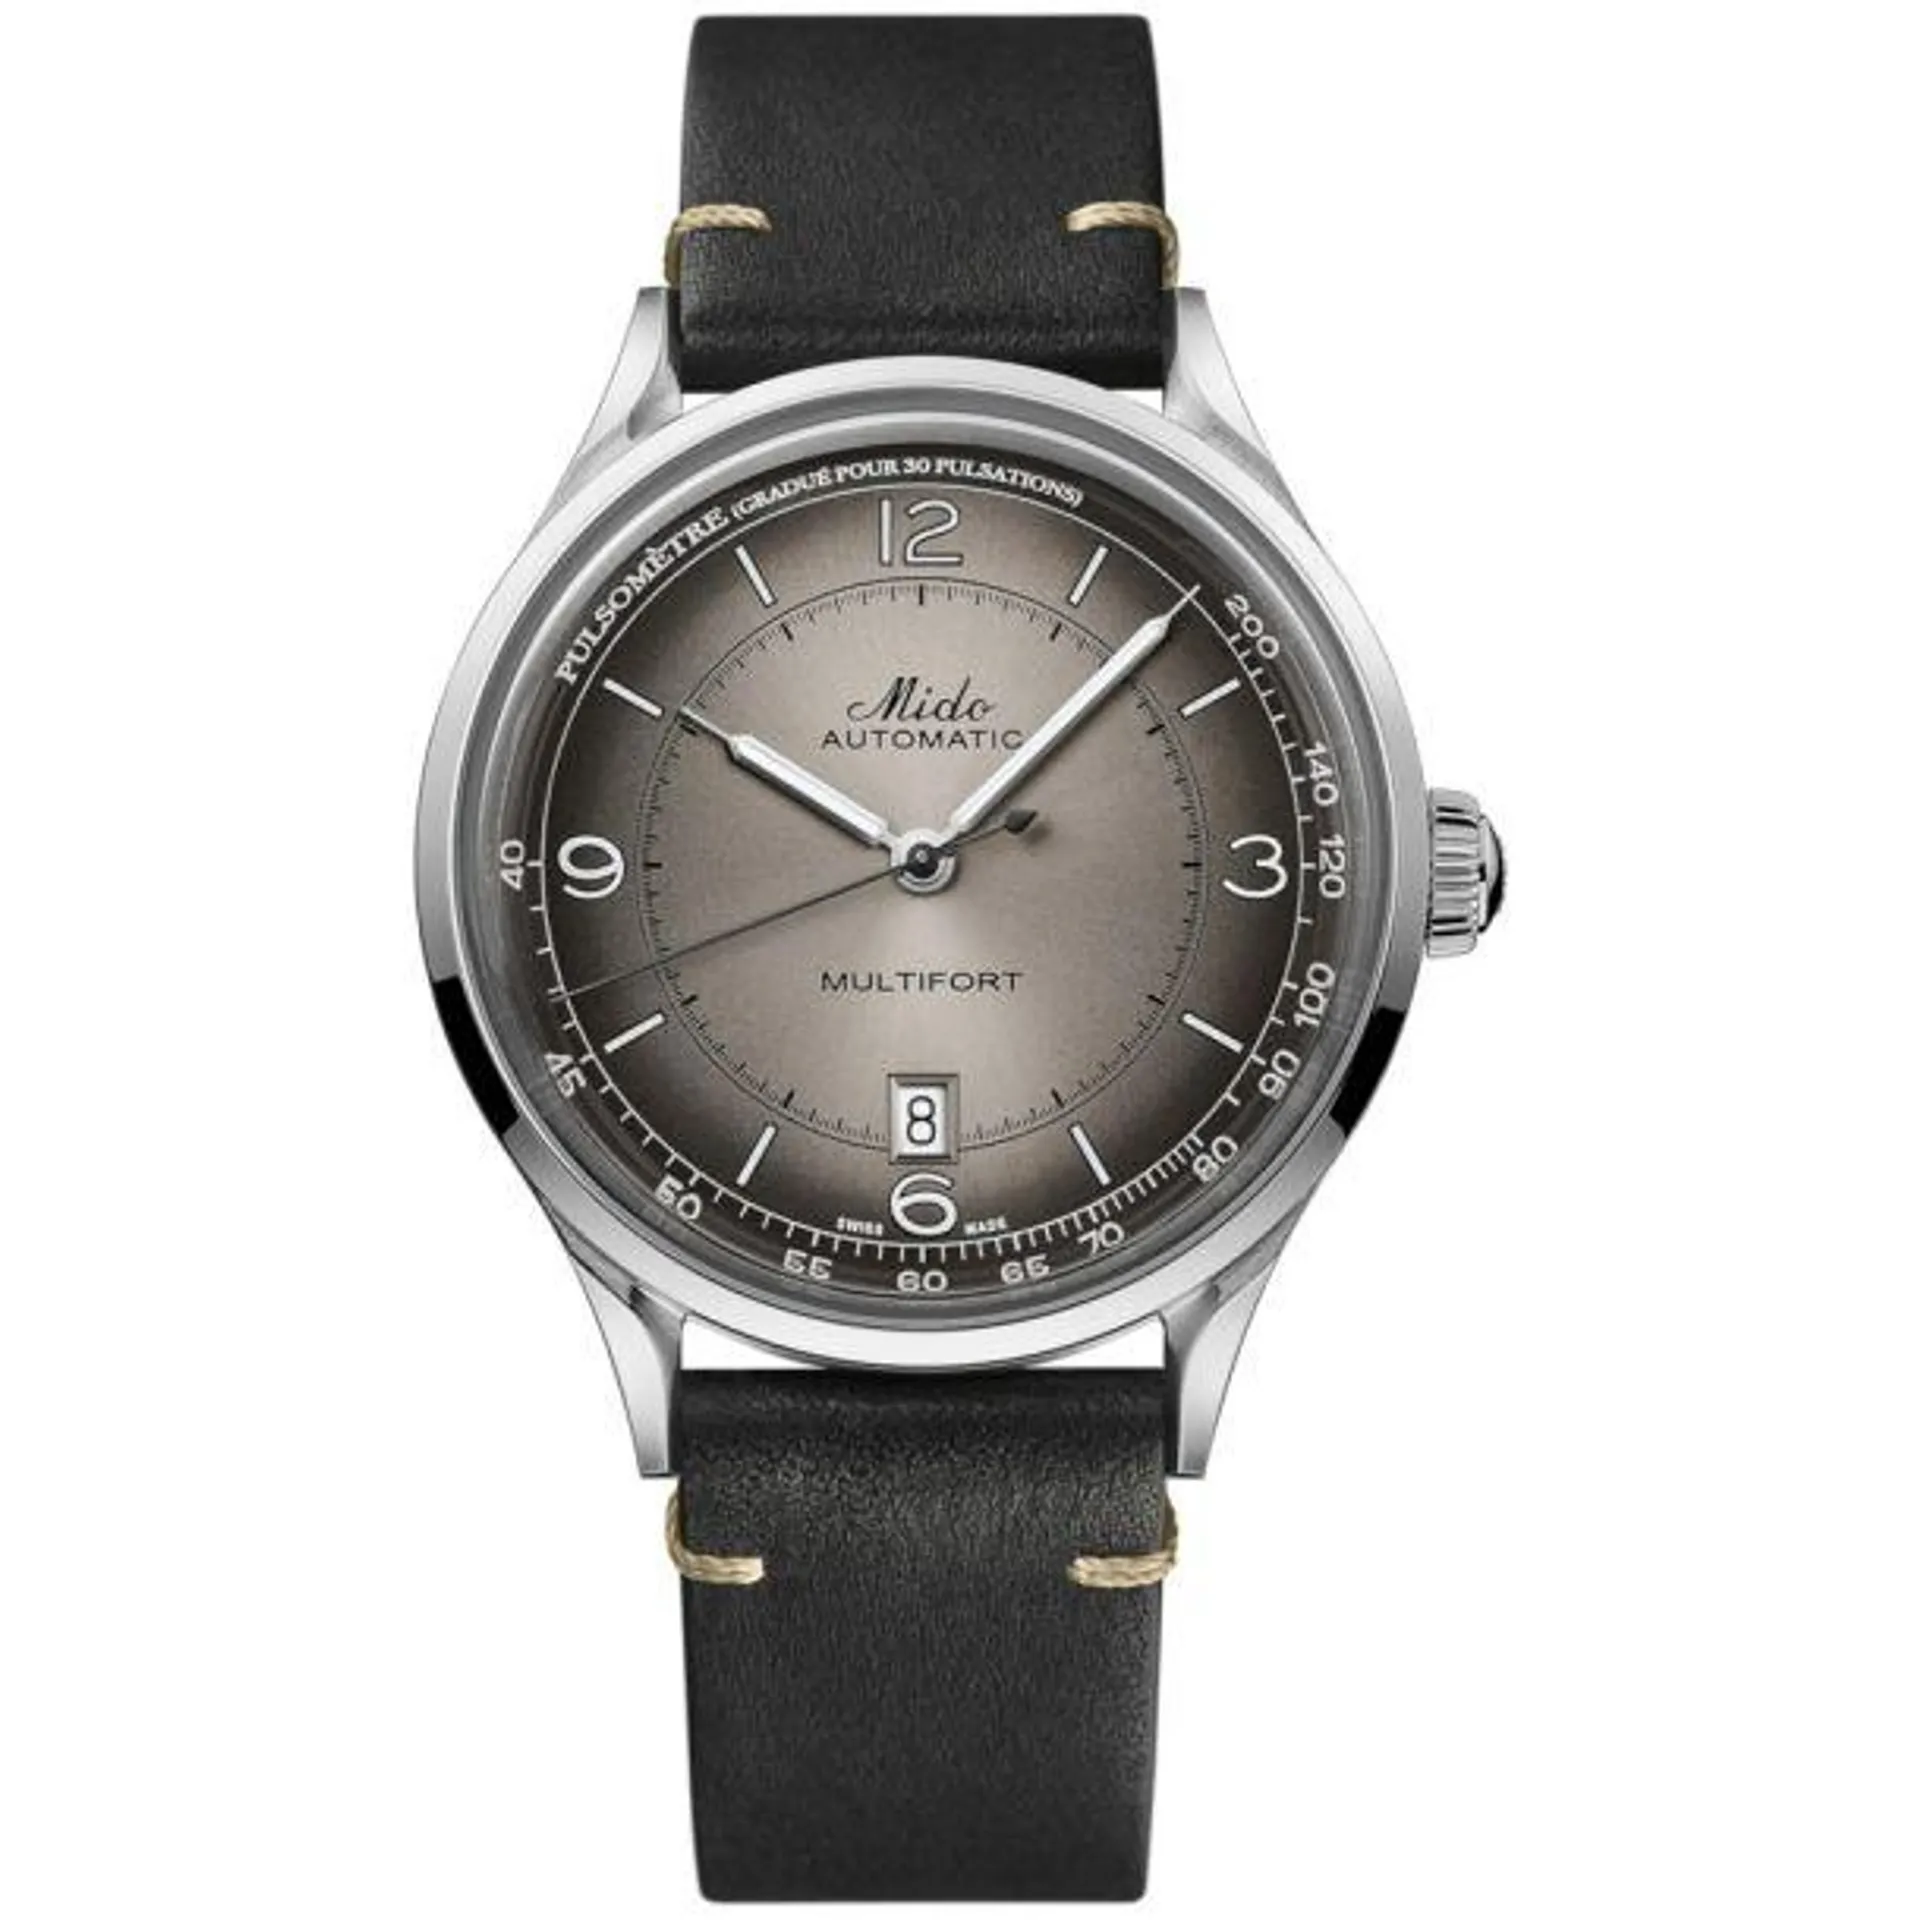 Mido Multifort Patrimony Men's 40mm Automatic Black Leather Strap Watch - Black Dial